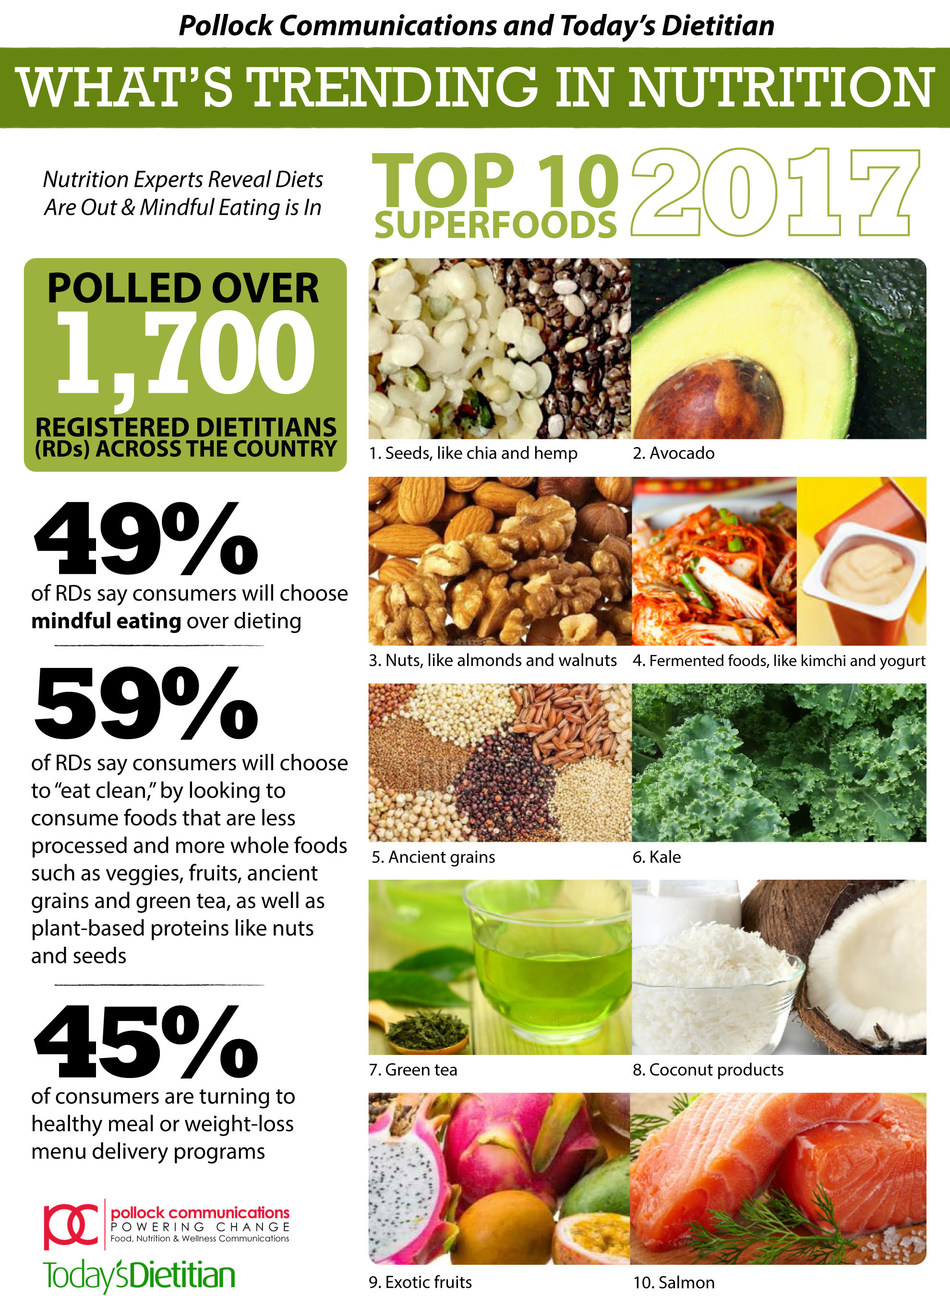 National Survey Taps Over 1,700 Dietitians to Predict Top 2017 Food Trends